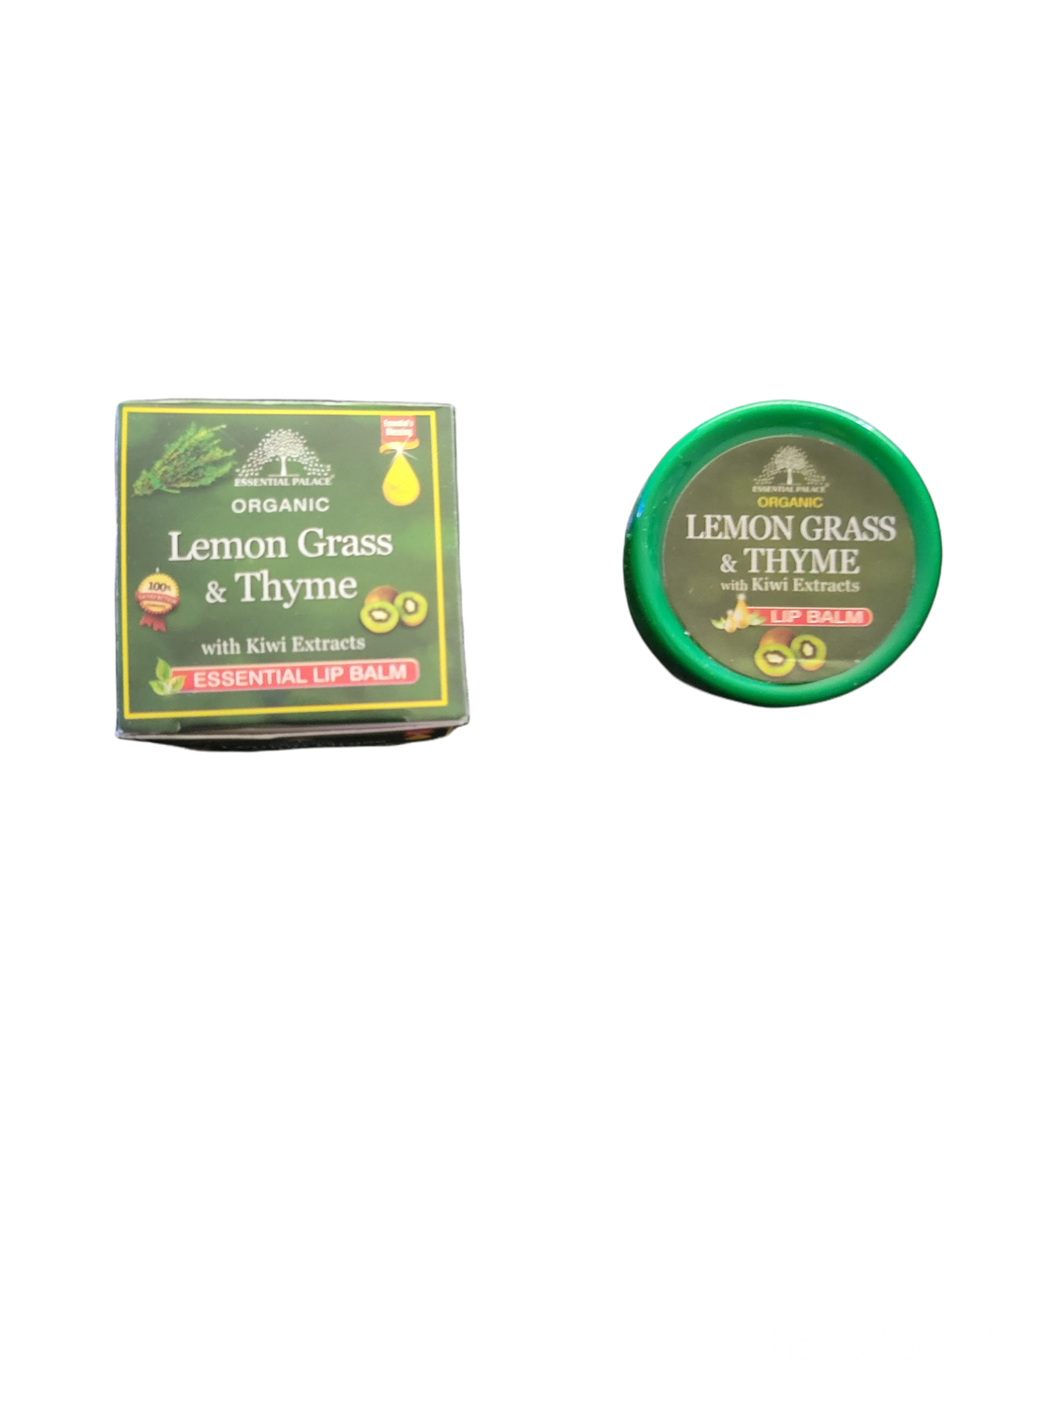 Lemon Grass & Thyme Lip Balm with Kiwi Extracts